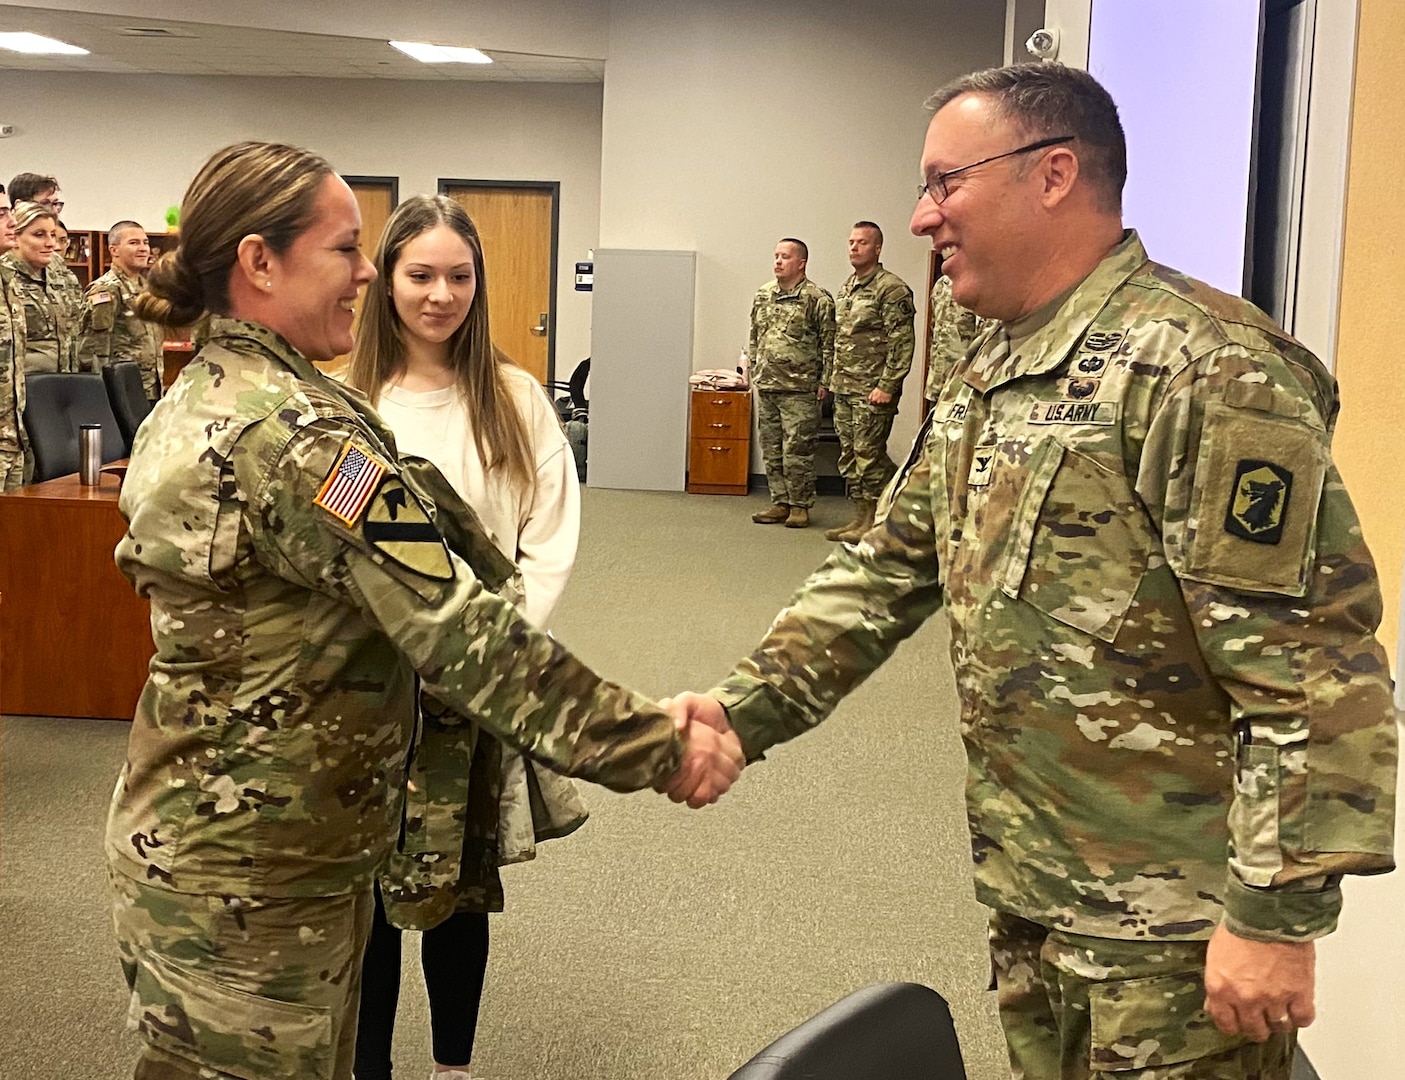 Illinois Army National Guard Maj. Monica Perez of Mount Prospect, Ill., shakes hands with Col. David Helfrich, the commander of the 404th Maneuver Enhancement Brigade after Perez's promotion ceremony at the brigade headquarters on the Heartland Community College campus in Normal, Ill., on Nov. 18. Perez serves as the plans officer (S5) of the brigade.